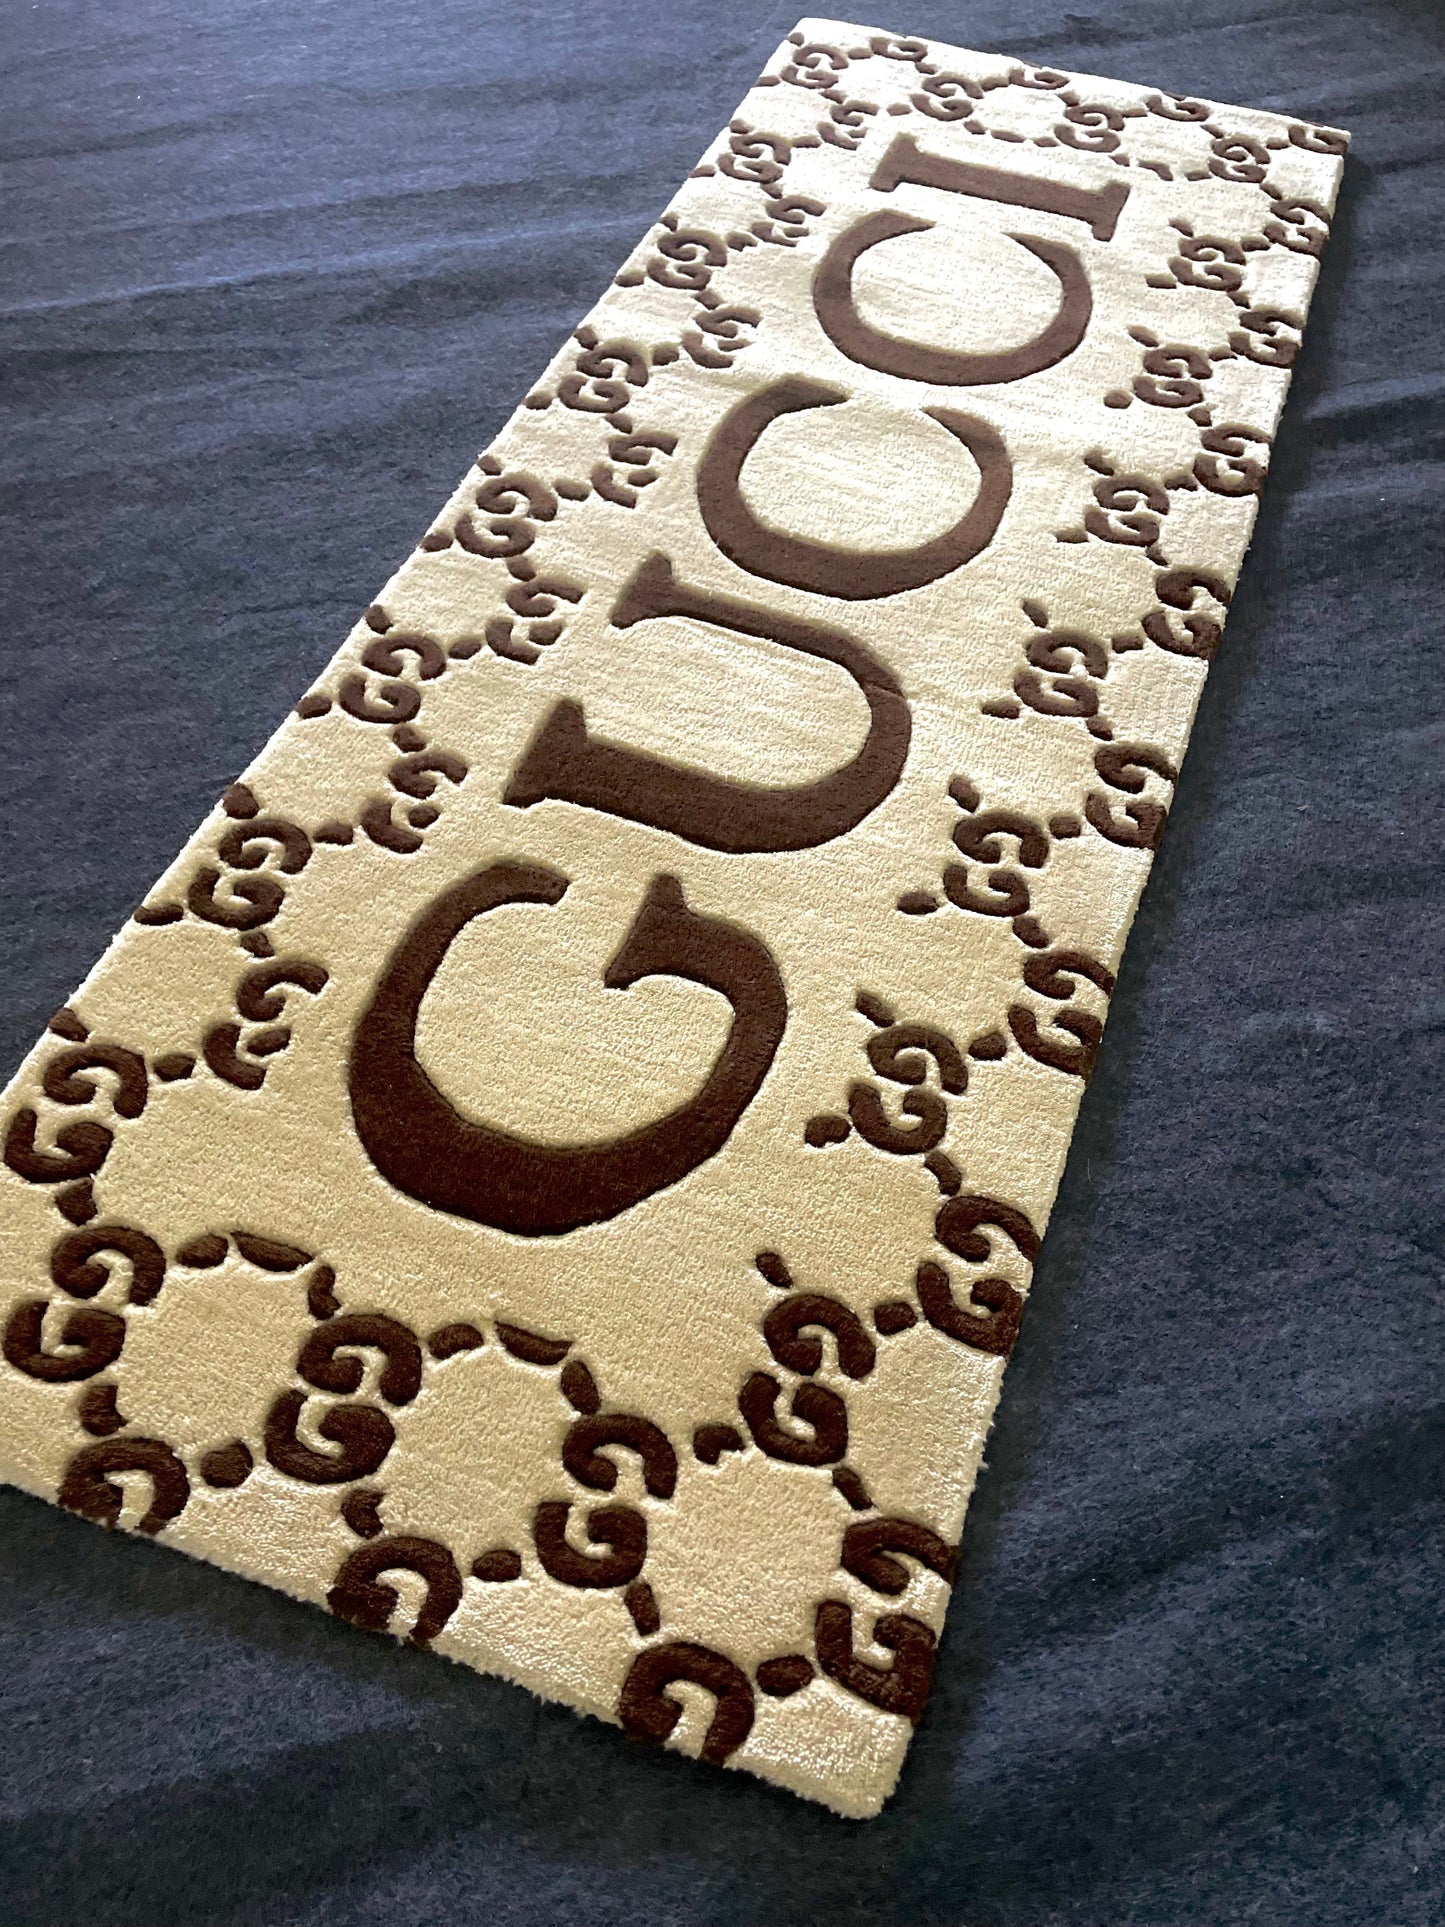 Gucci Brand Hand-Tufted Rug | Ready To Ship